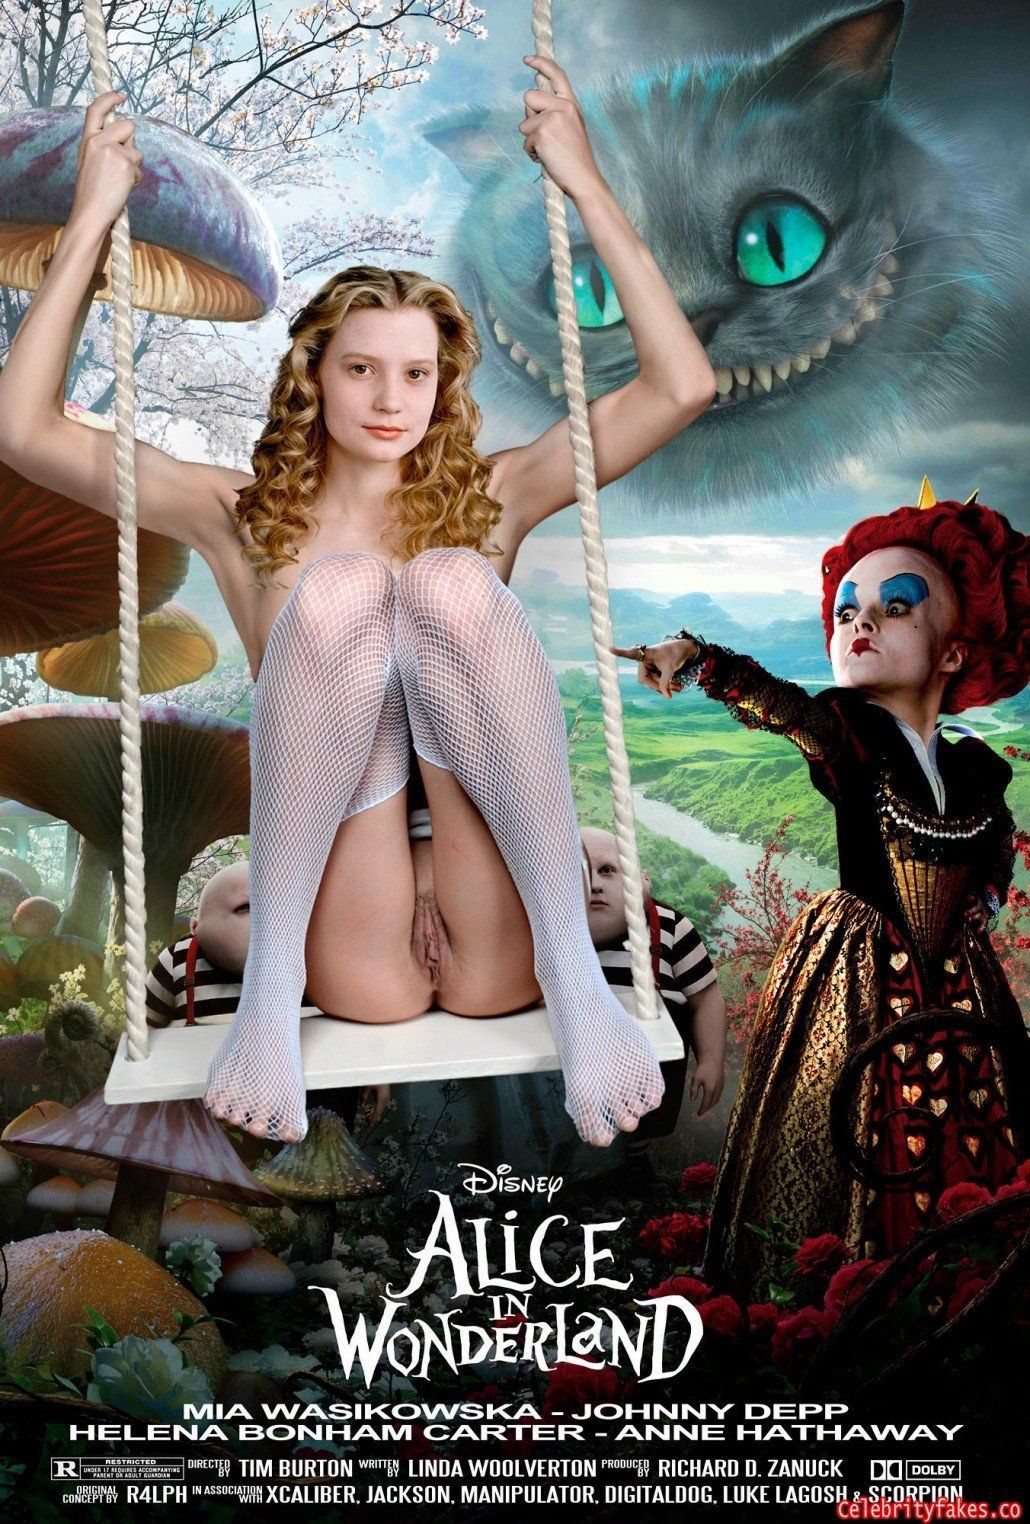 Alice in Wonderland: An X-Rated Musical Comedy.